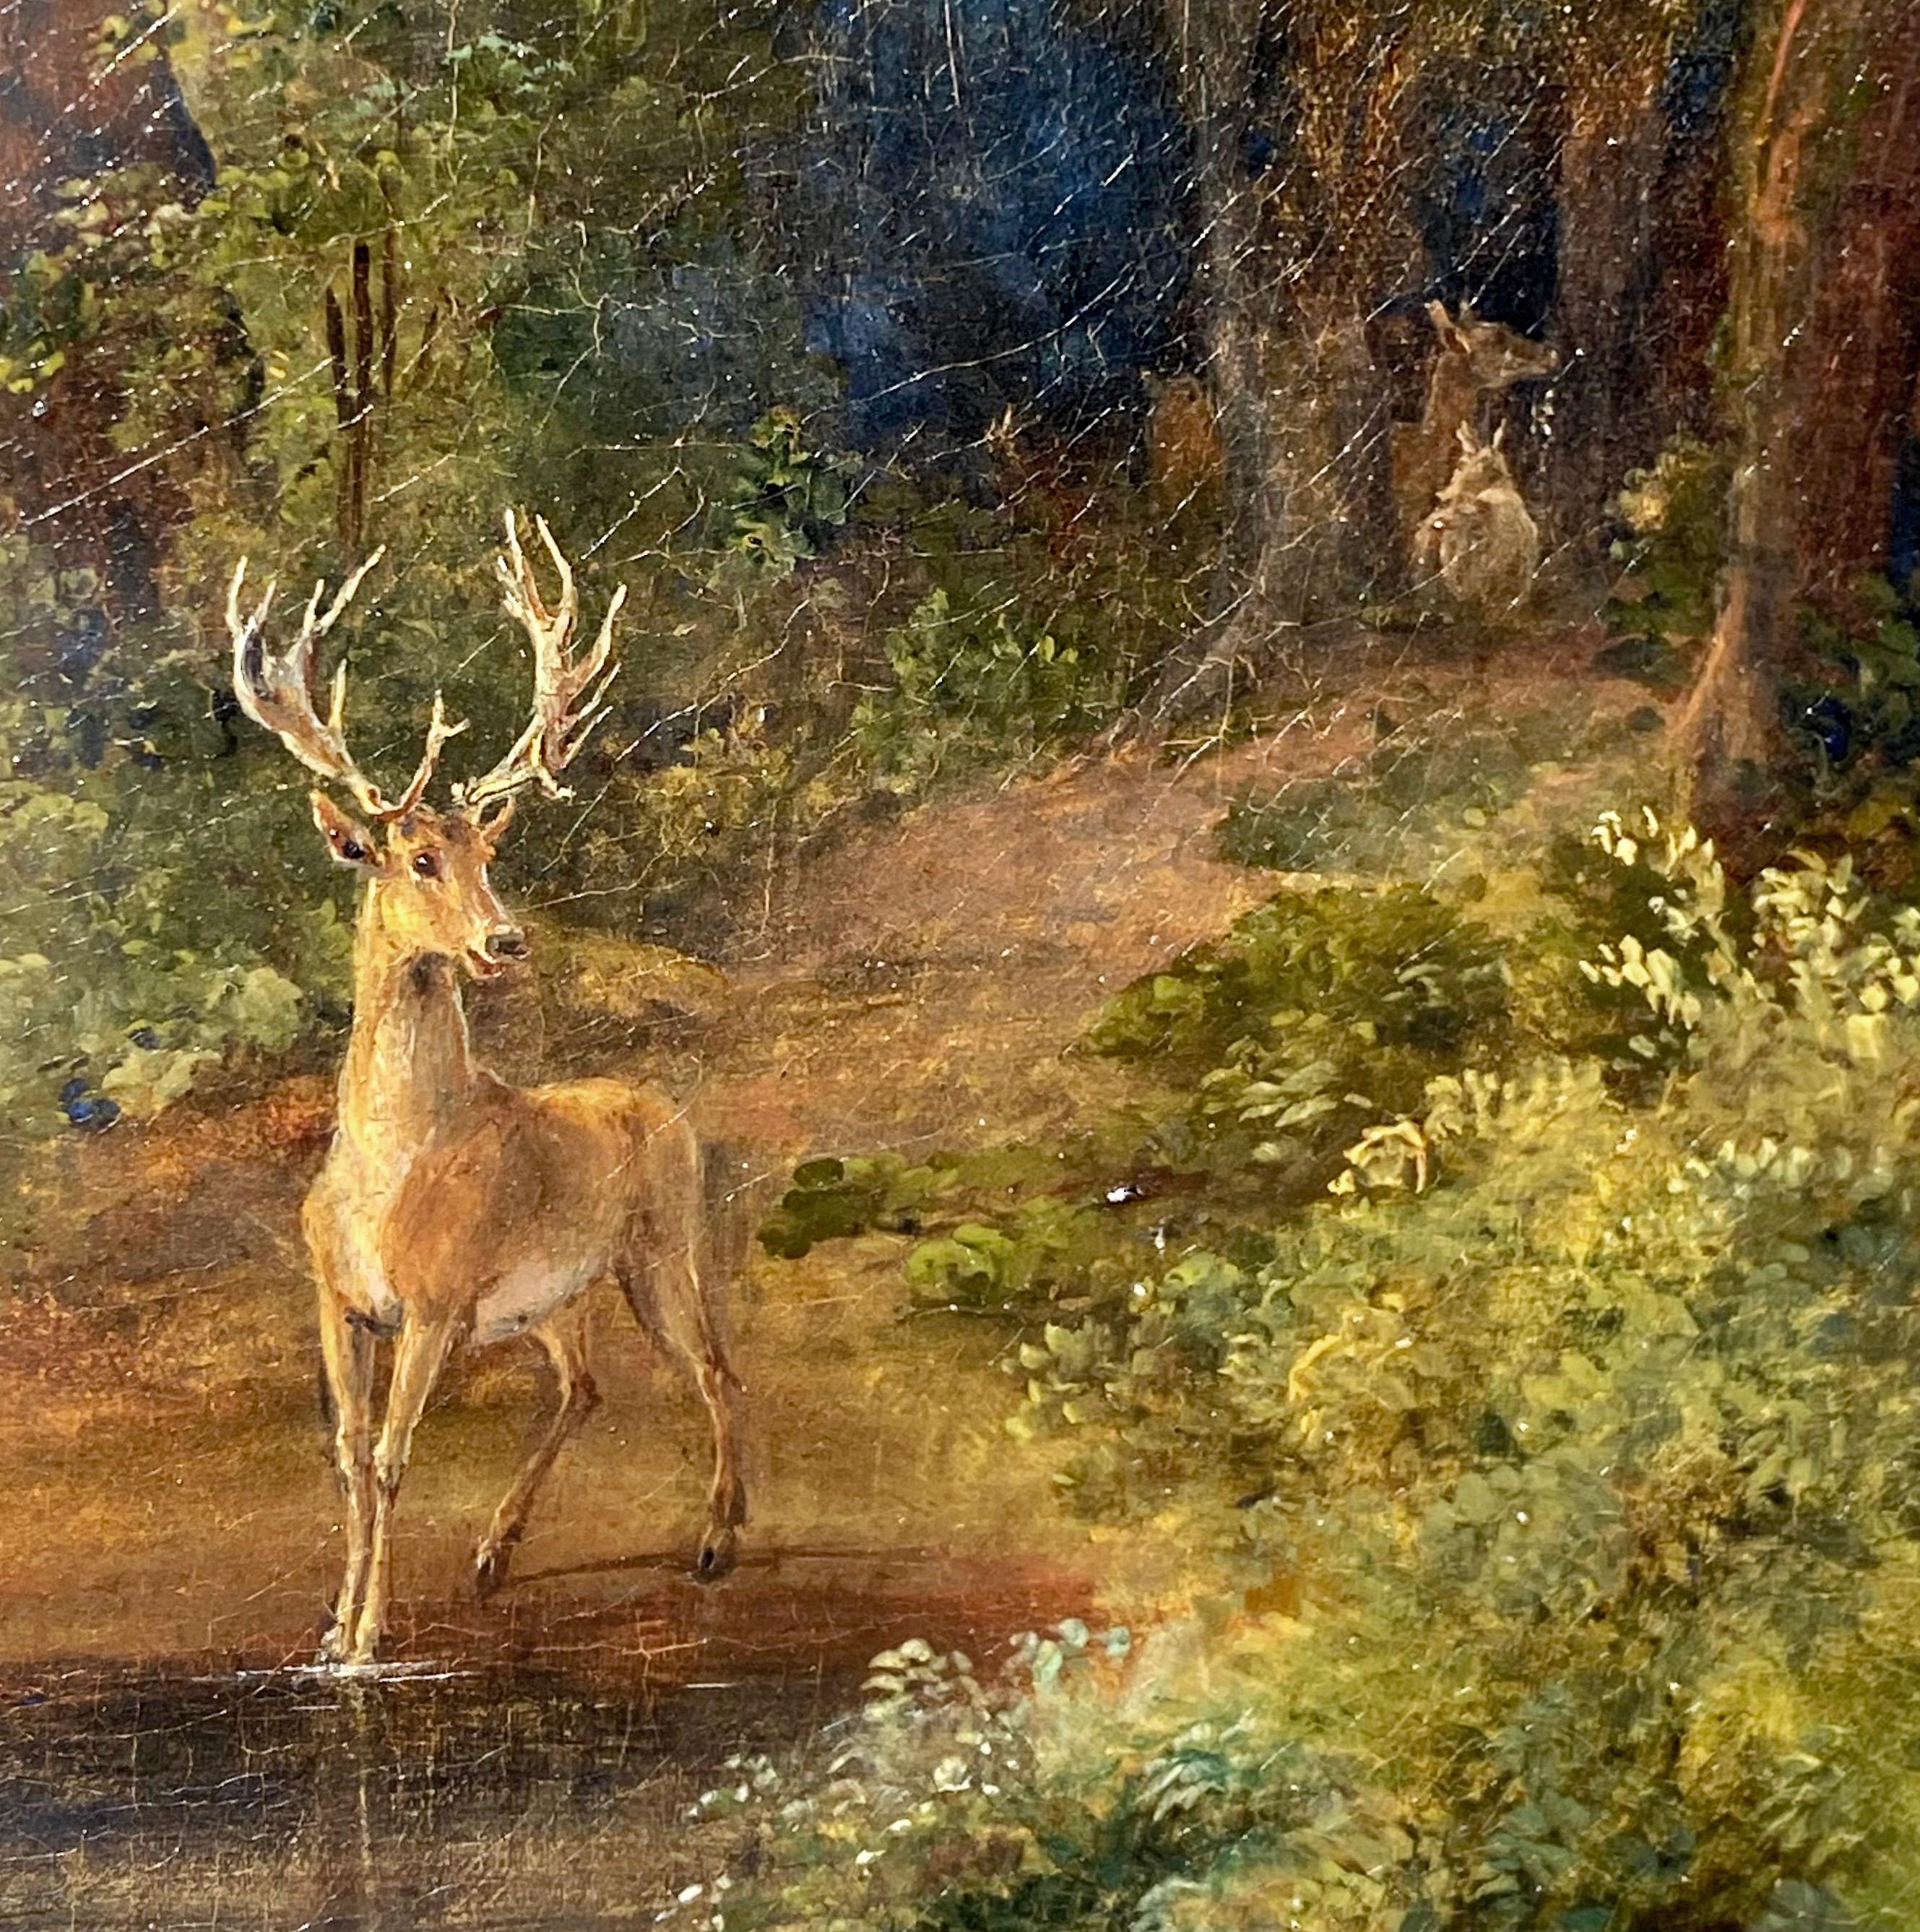 19th century German painting - Deer family in a forest - Romantic Landscape  - Brown Animal Painting by Johann Wilhelm Schirmer 